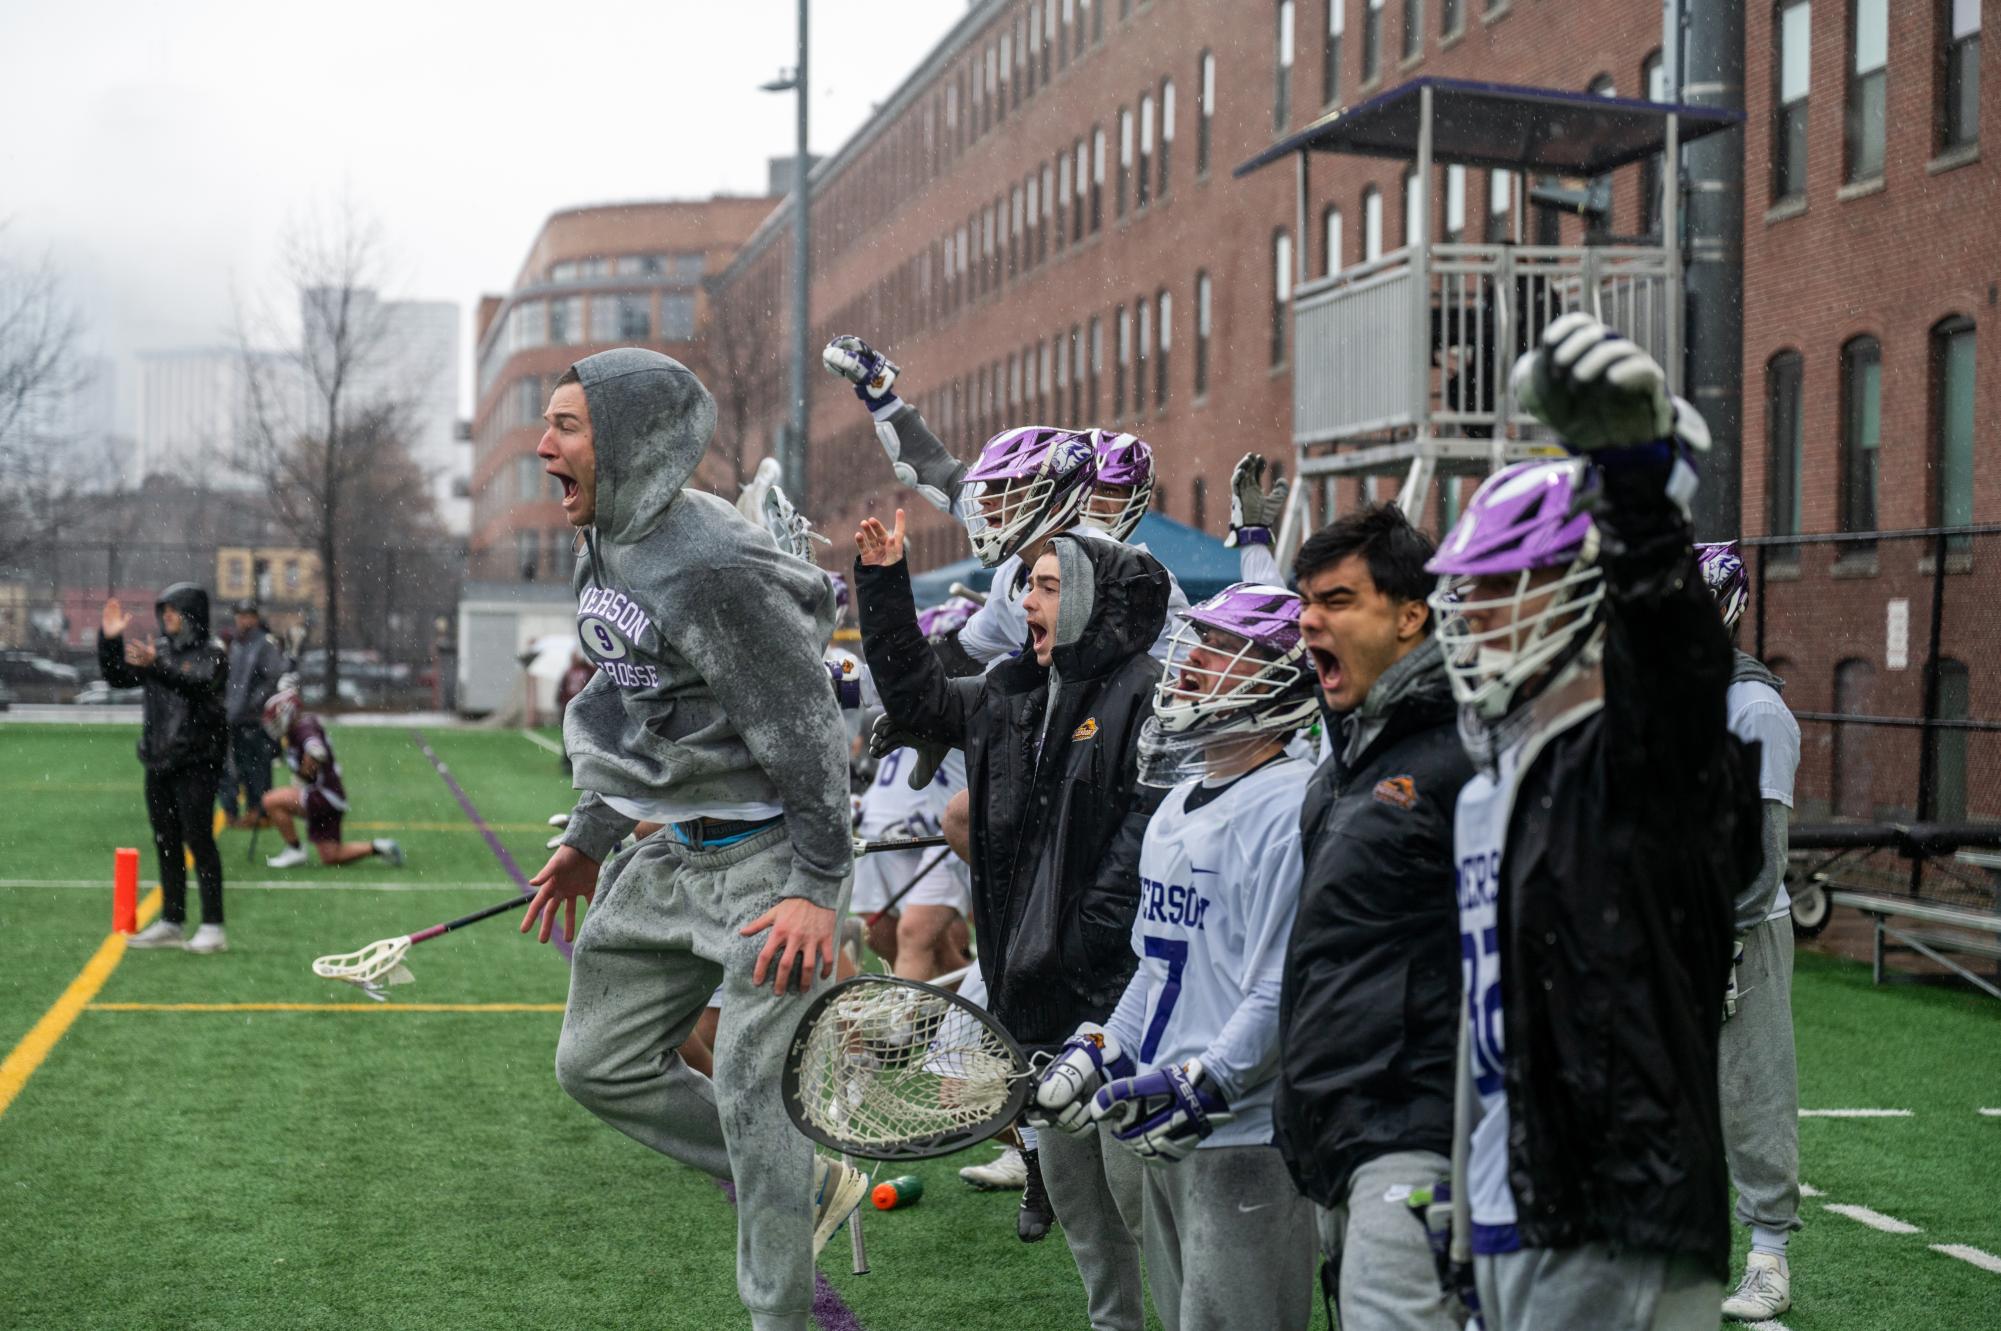 Photos%3A+Emerson+mens+lacrosse+secures+rain-soaked+NEWMAC+victory+against+Springfield